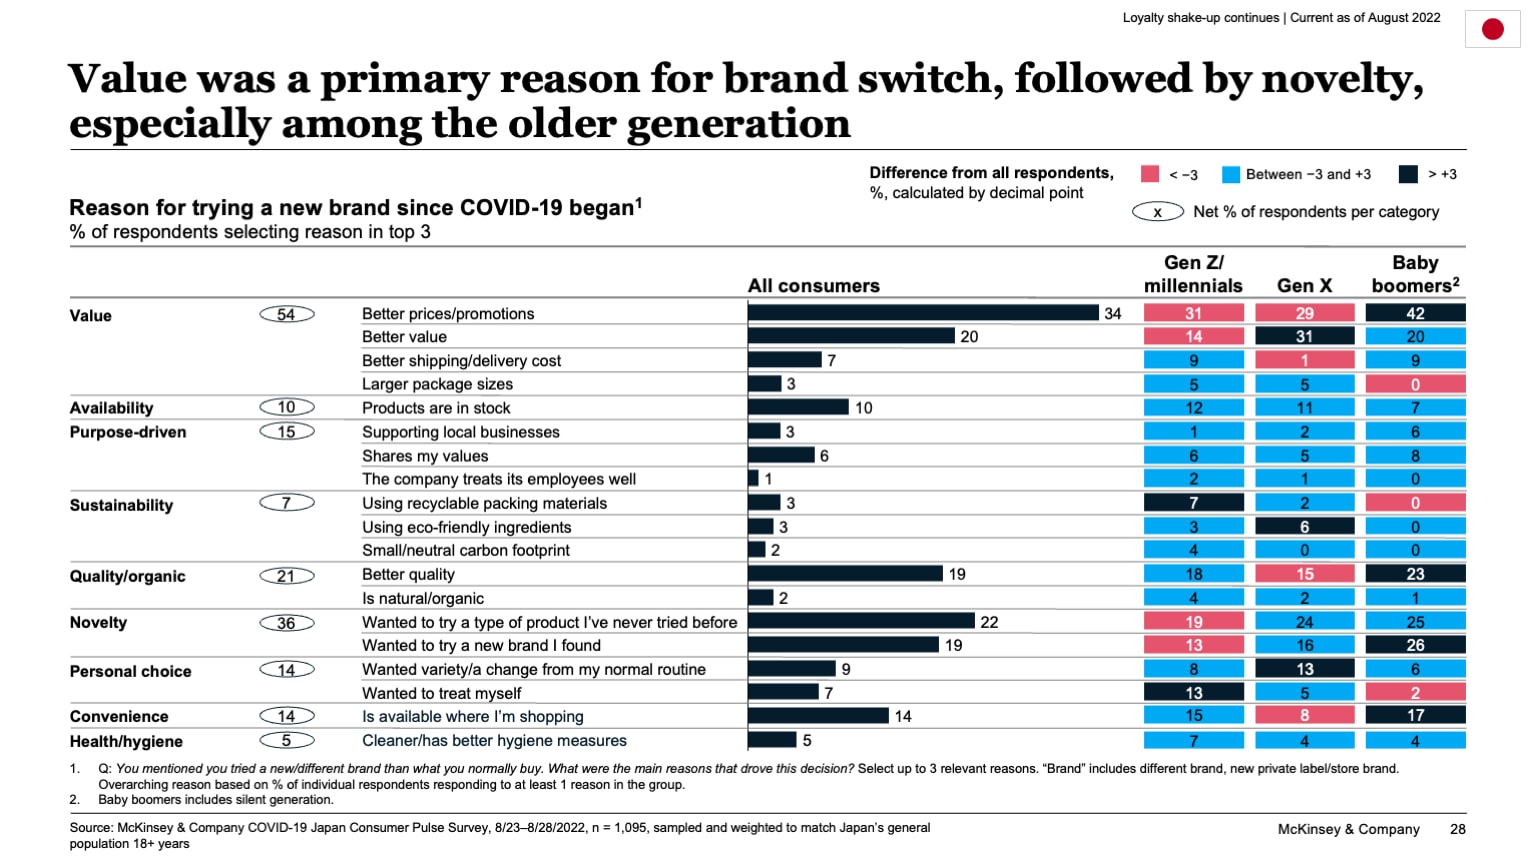 Value was a primary reason for brand switch, followed by novelty, especially among the older generation